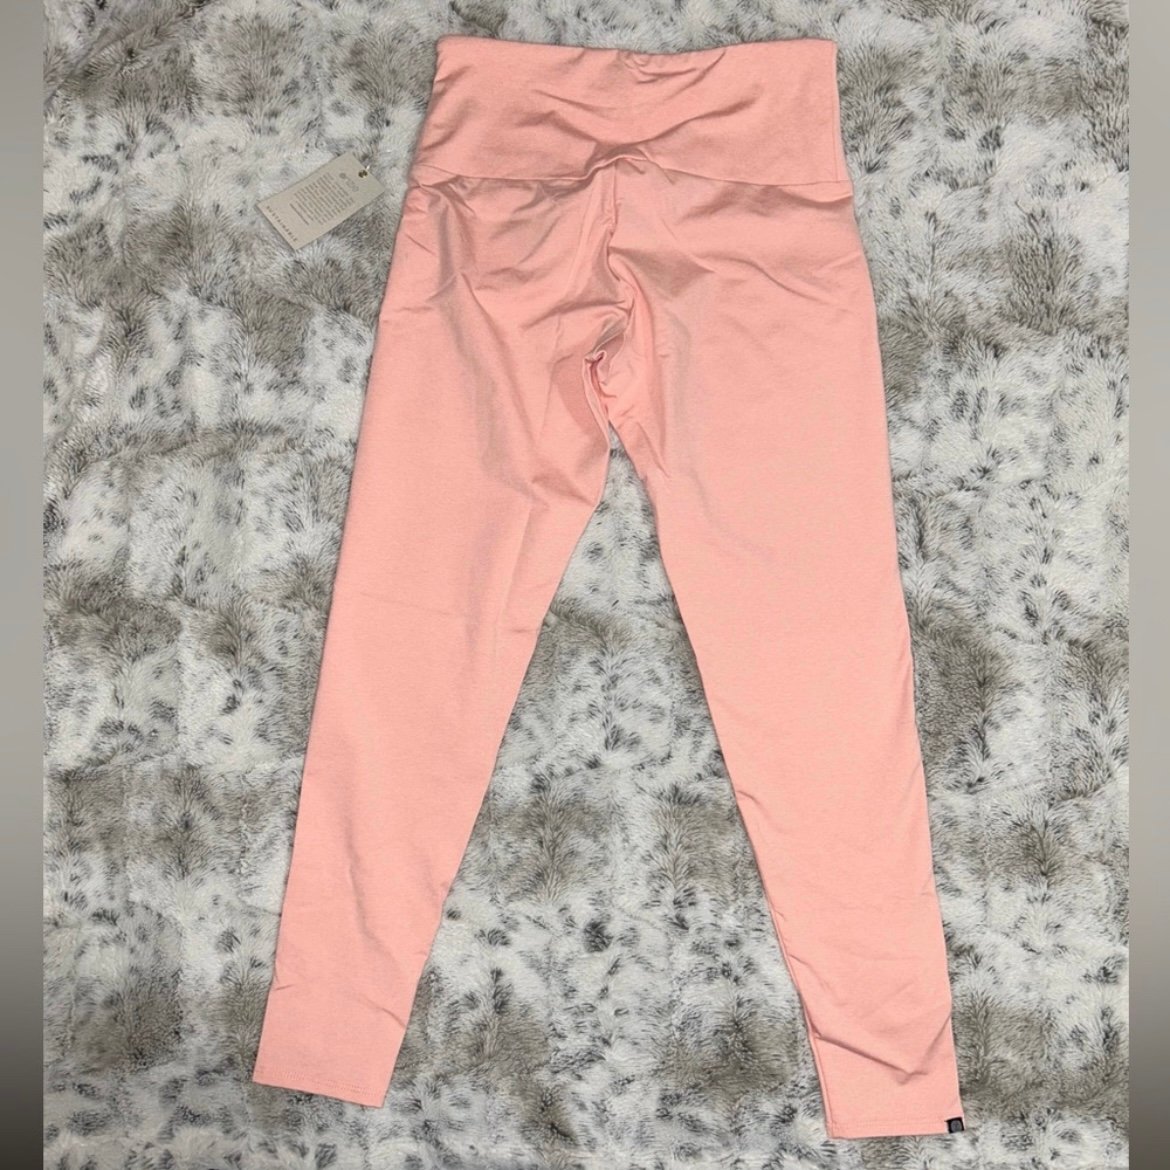 large selection NWT Onzie | Sustainable Soul Eco Luxe High Rise Leggings | Peach Quartz M/L pqsi0h76j well sale